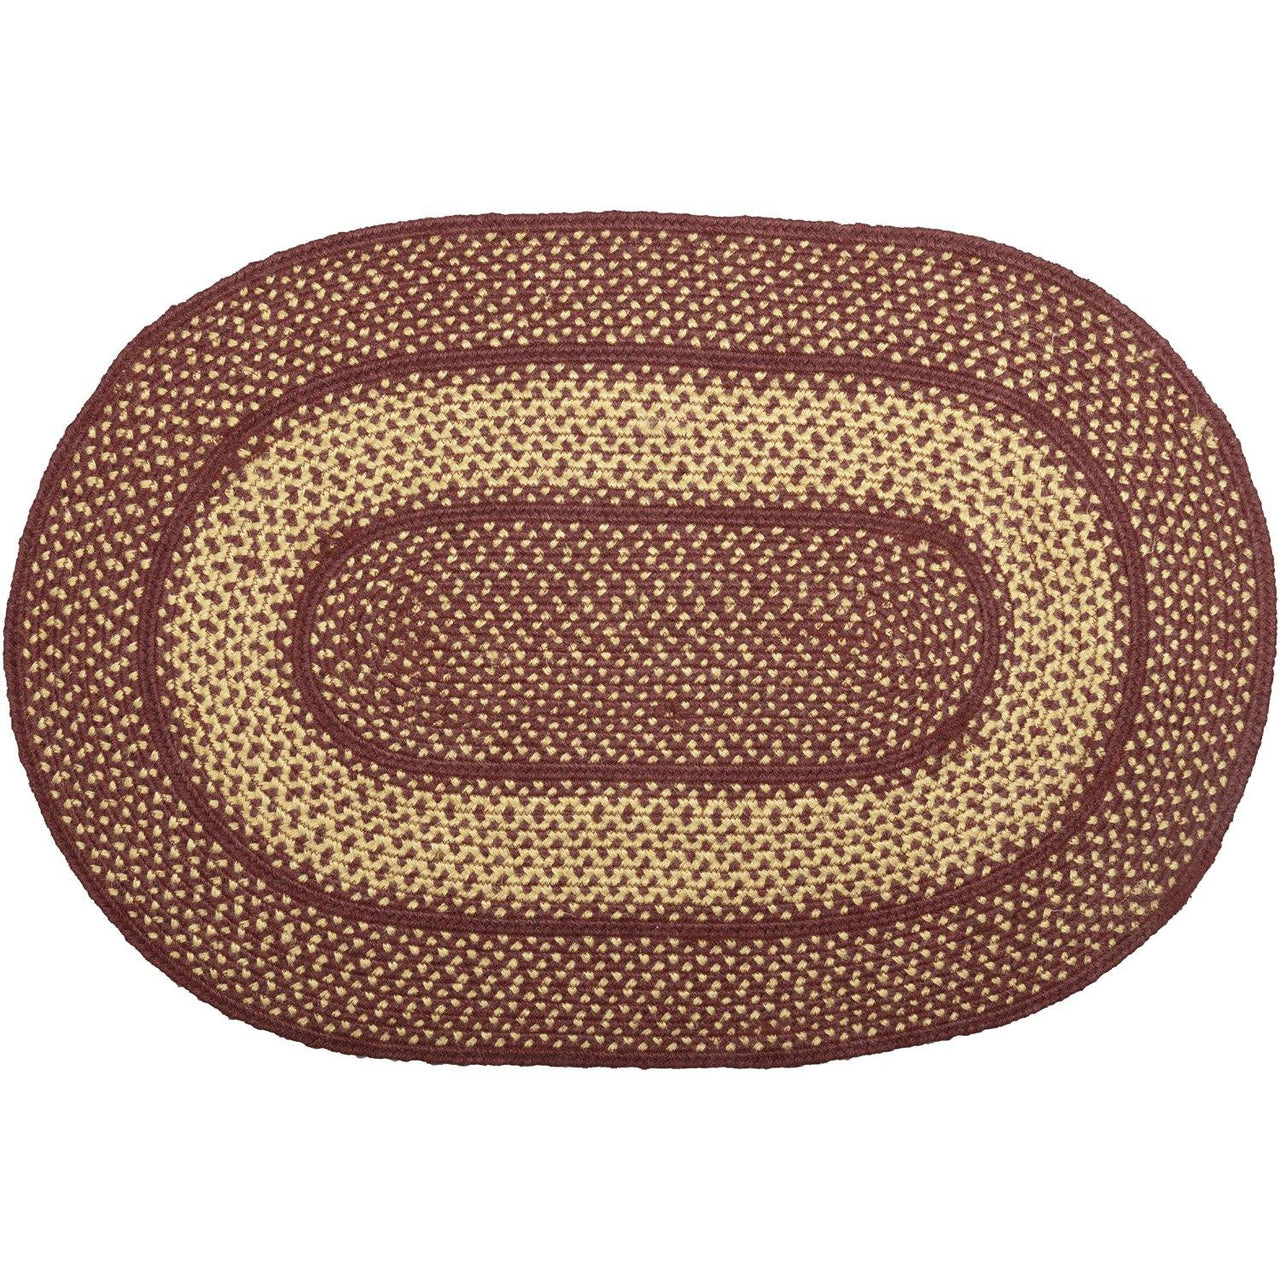 Burgundy Red Primitive Jute Braided Rug Oval 24"x36" with Rug Pad VHC Brands - The Fox Decor